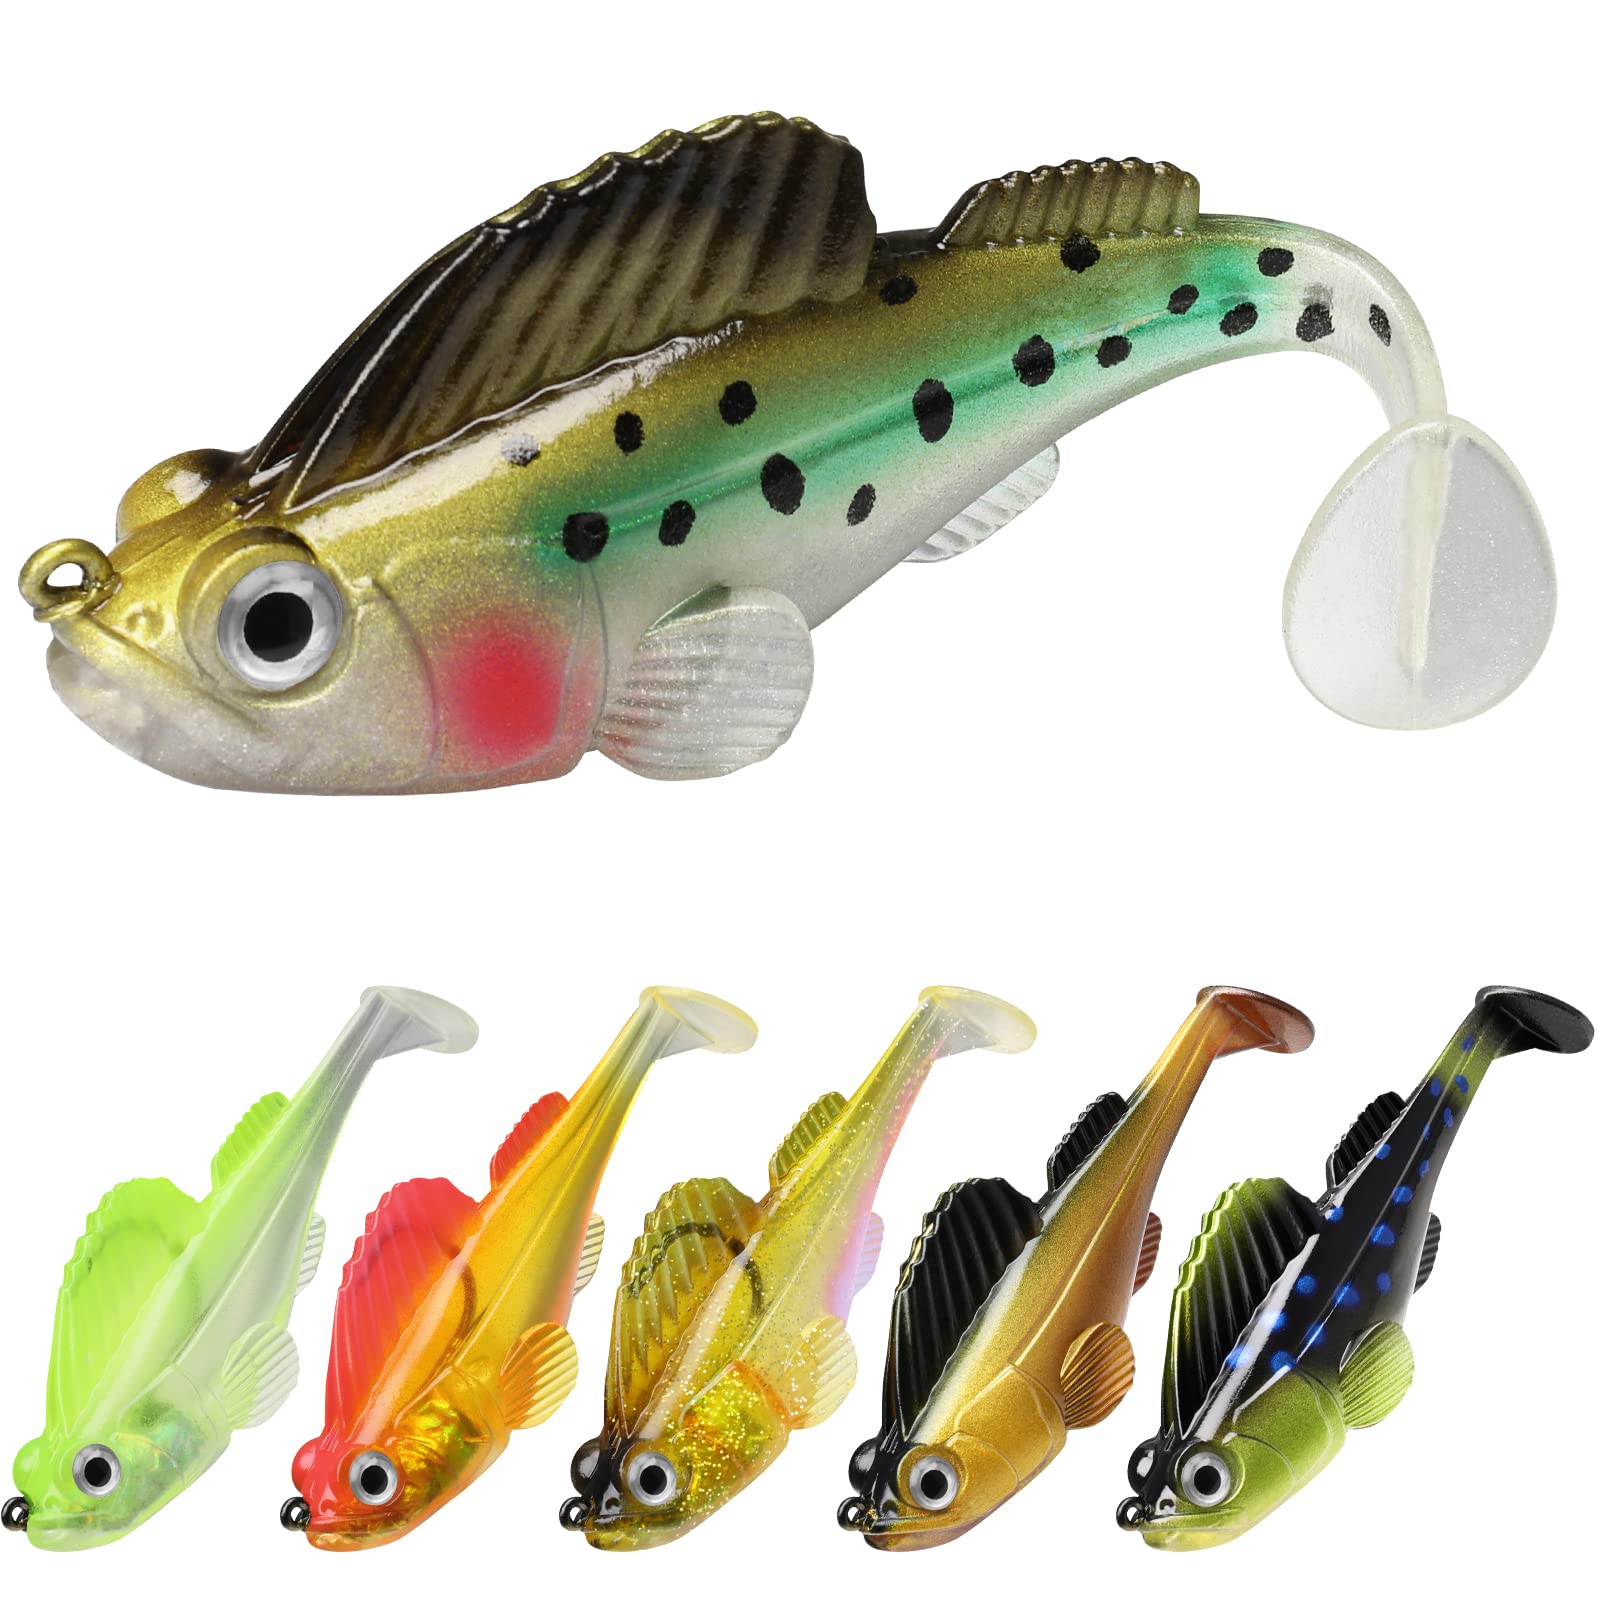 Fishing 5pcs/Lot 60mm 3g Set Pre-Rigged Jig Head Soft Shrimp Fishing Lures  Swimbaits Jigs for Bass Fishing Shad or Tadpole Lure Premium Fishing Bait  for Saltwater Freshwater Trout Crappie Fishing